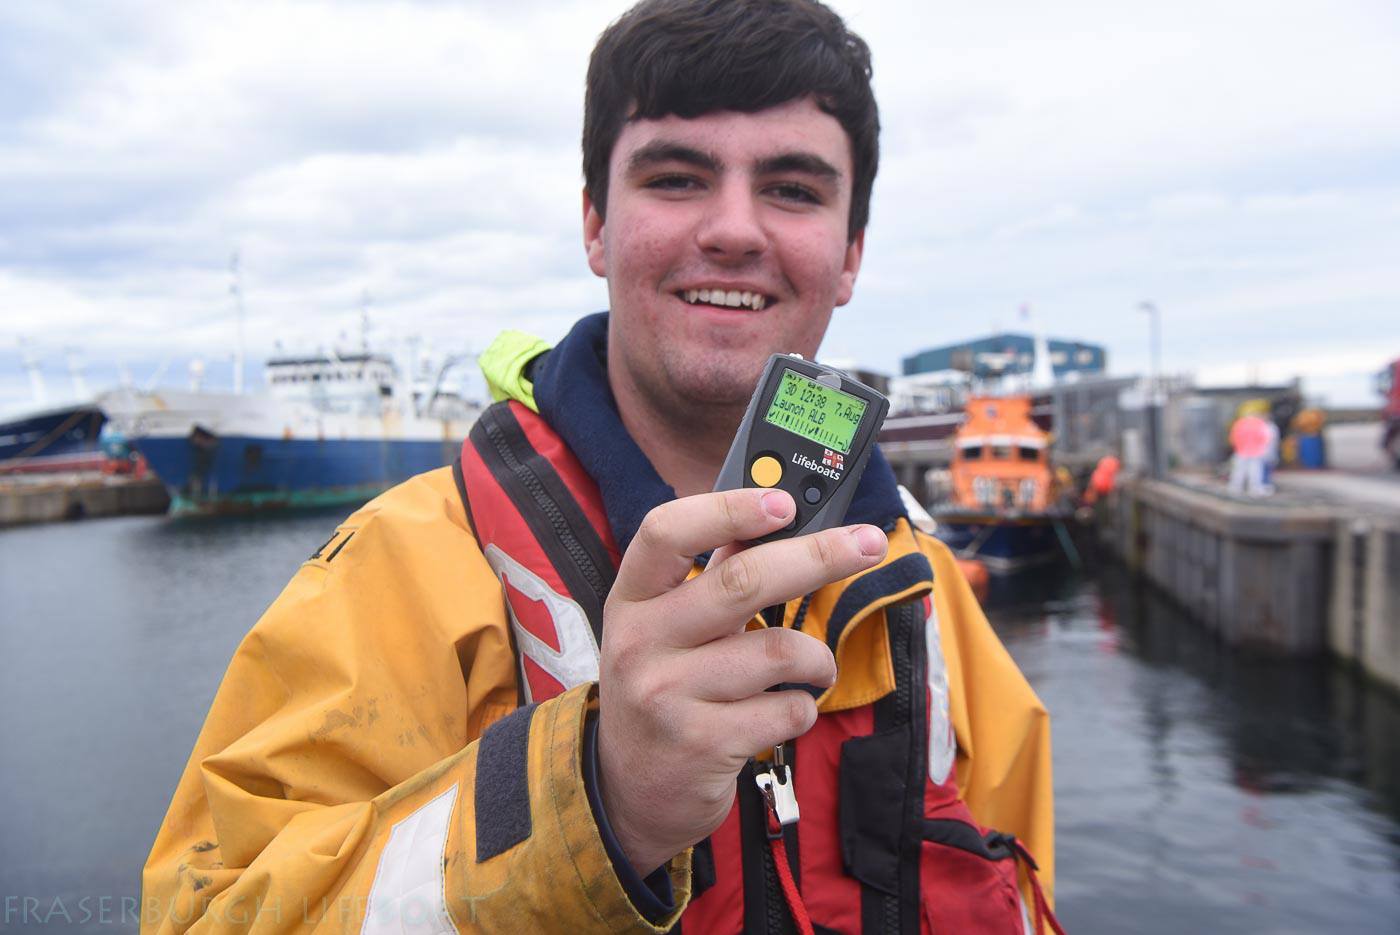 Declan Sutherland, 17, was called out just hours after being handed his pager